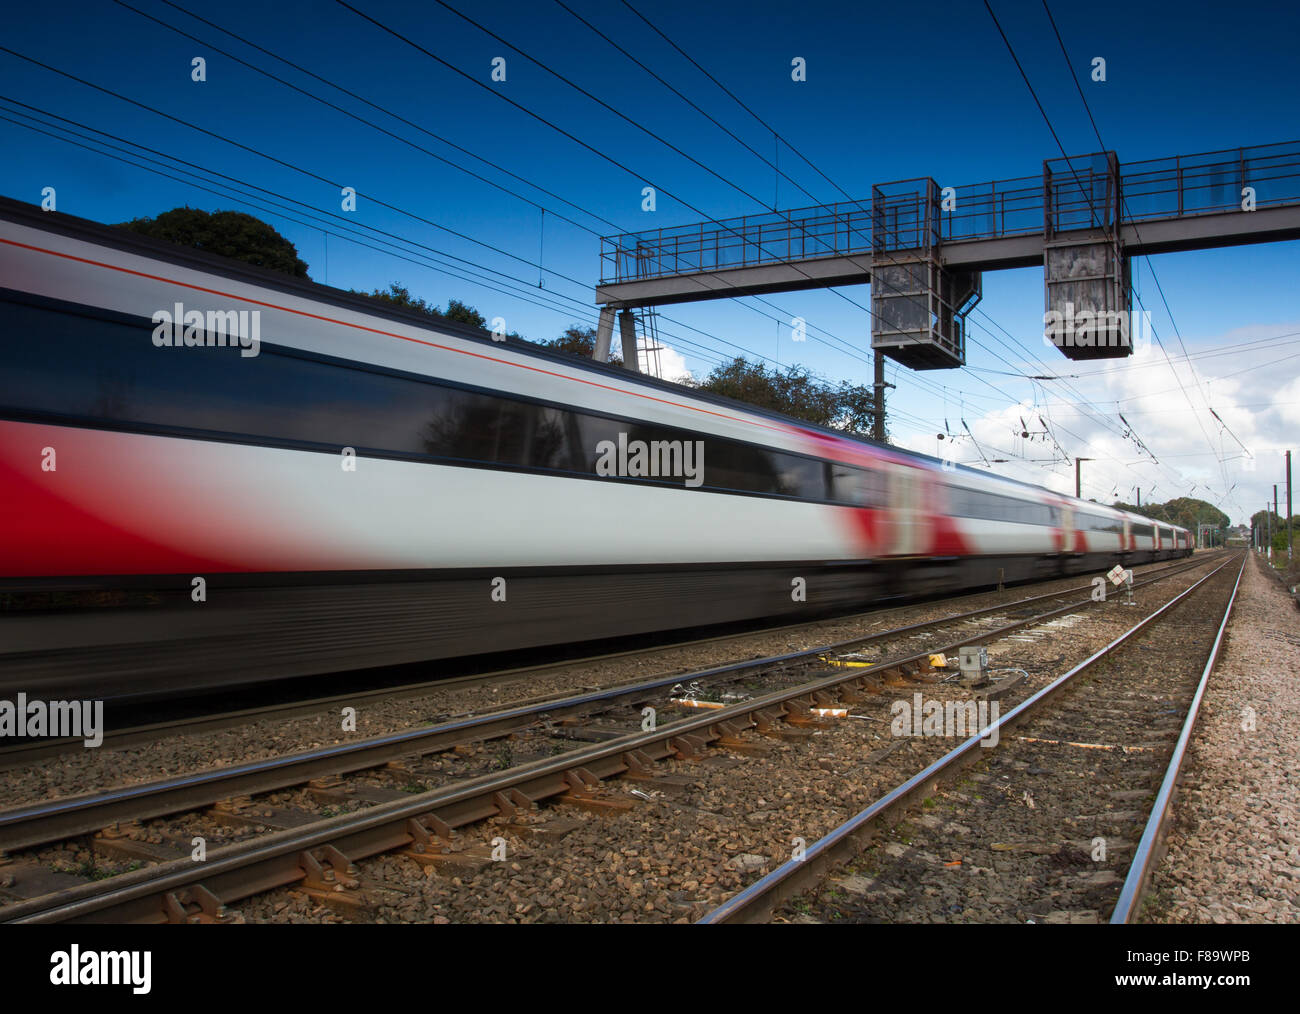 A blurred high speed passenger express train traveling along railway tracks with electrified wires overhead. Stock Photo